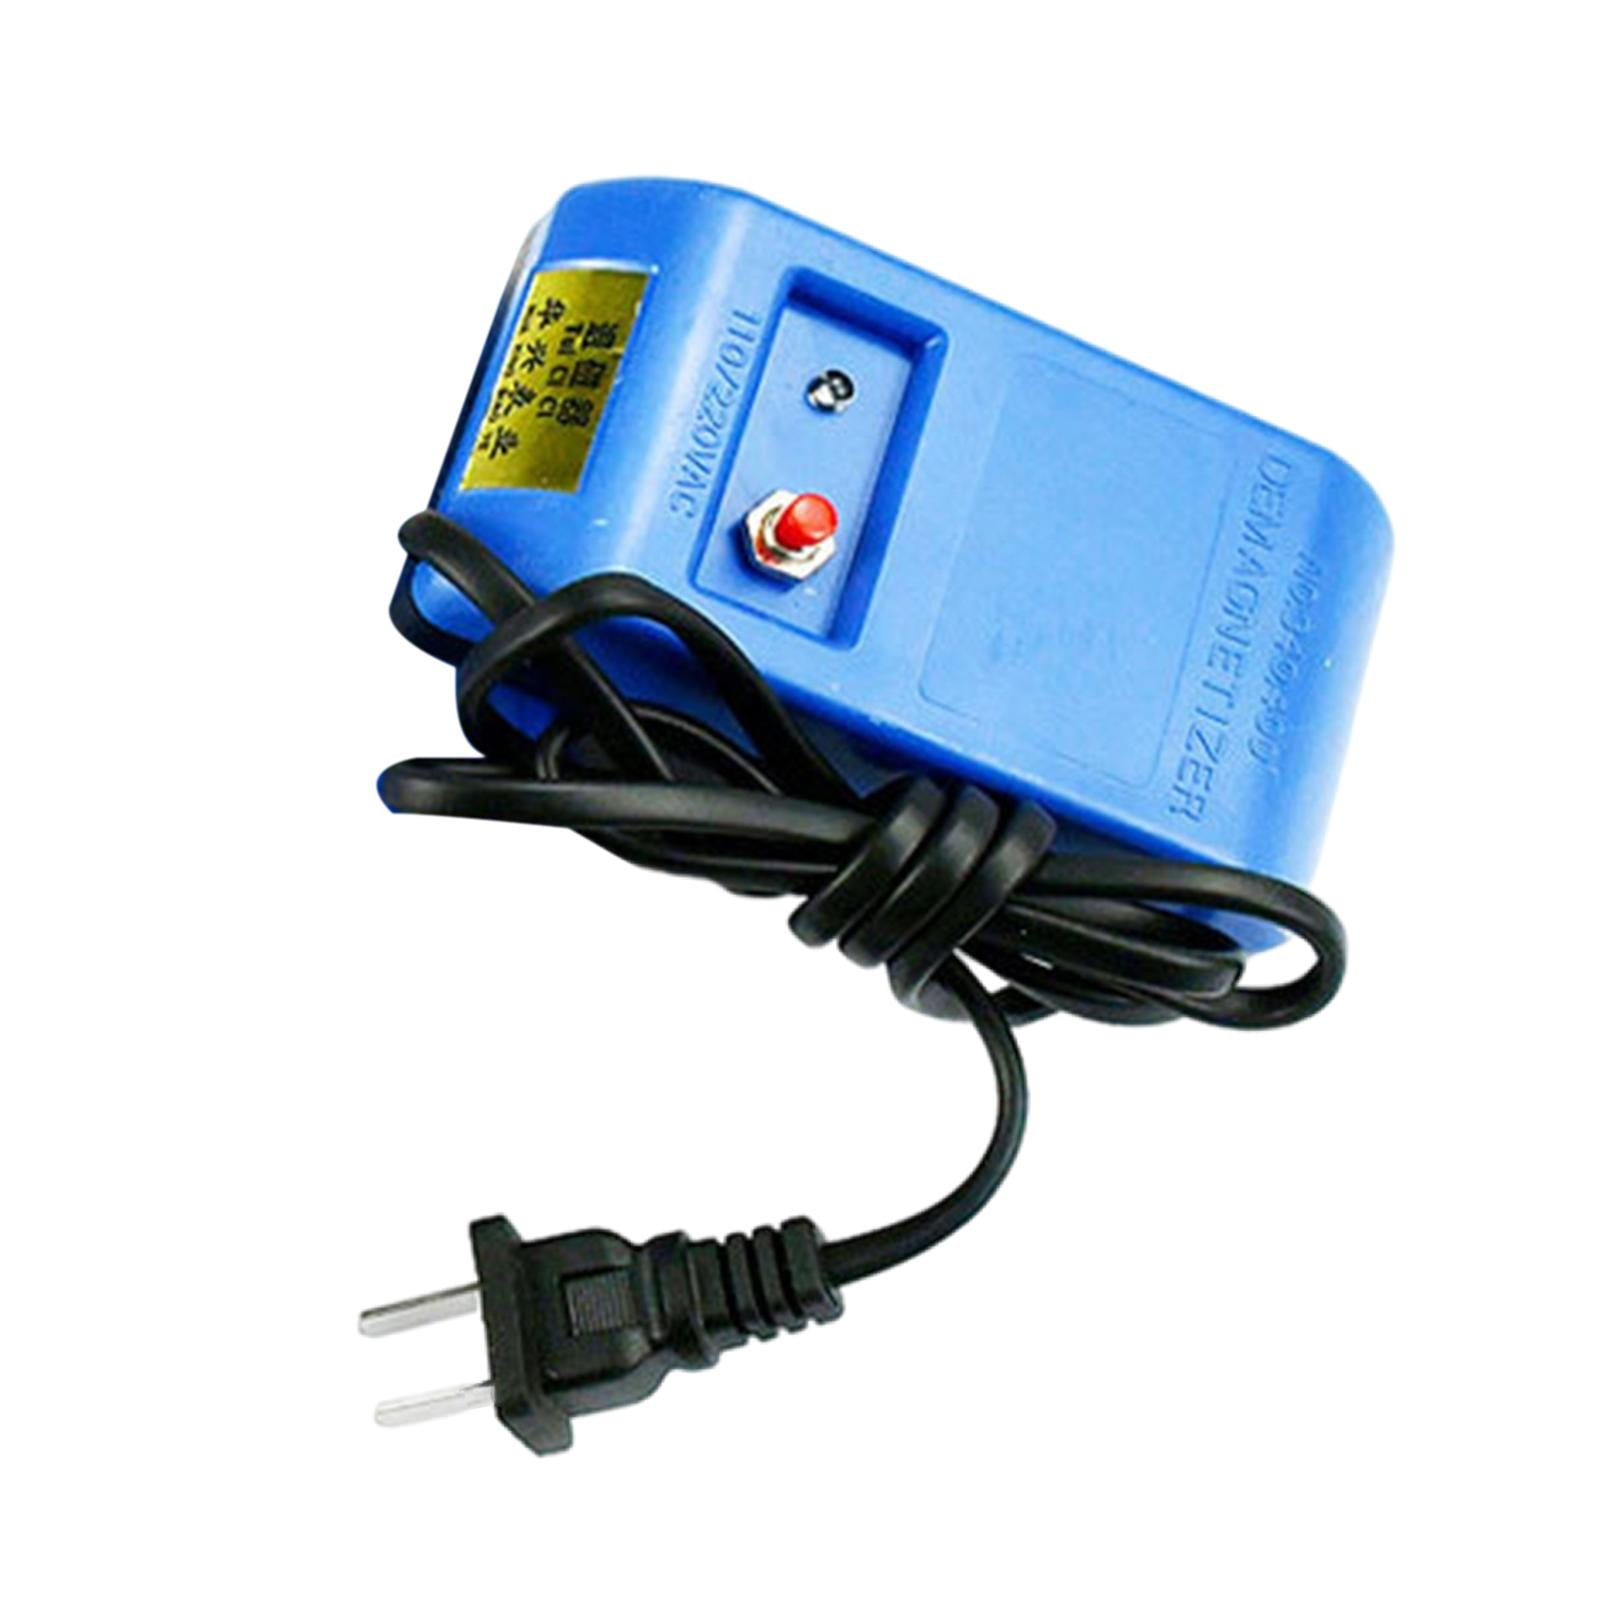 Details about   Watch Repair Demagnetizer Magnetic Demagnetise Machine Tool US Plug 115-230V 